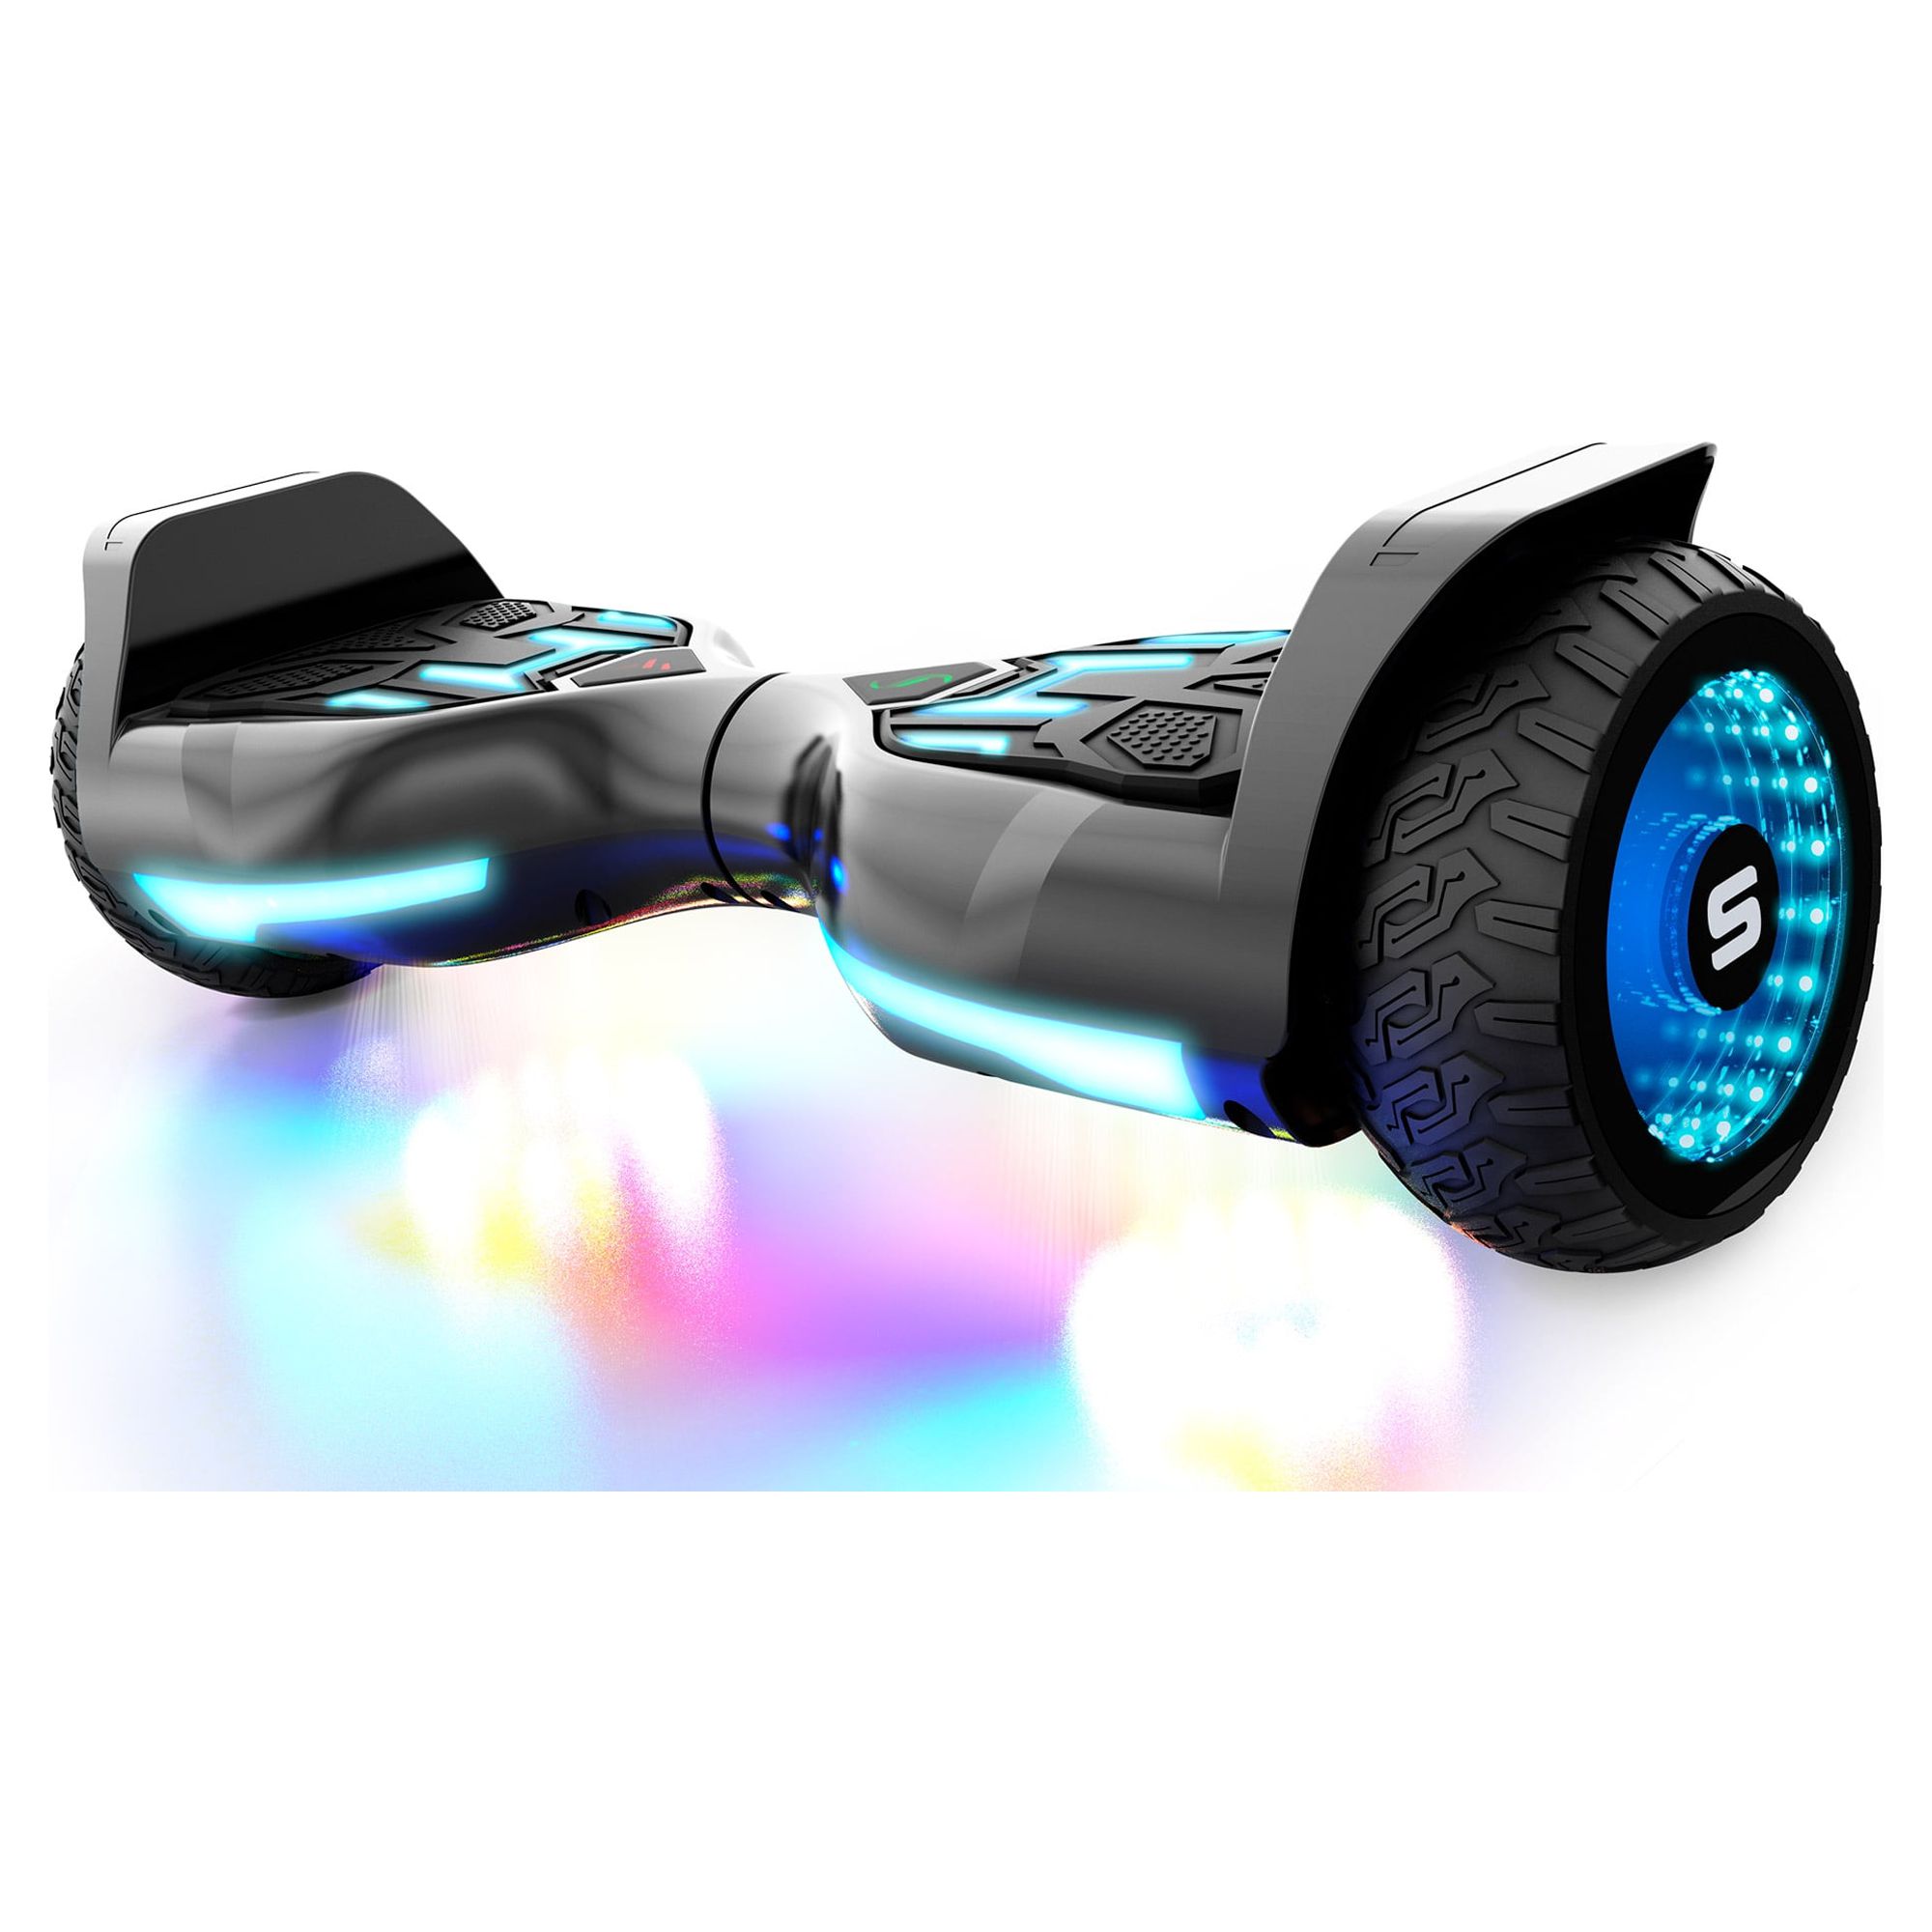 Swagtron Warrior T580 Hoverboard 220 Lbs Black Music-Synced Bluetooth LED Lights 7.5 Mph LiFePo Battery UL-Compliant - image 1 of 9